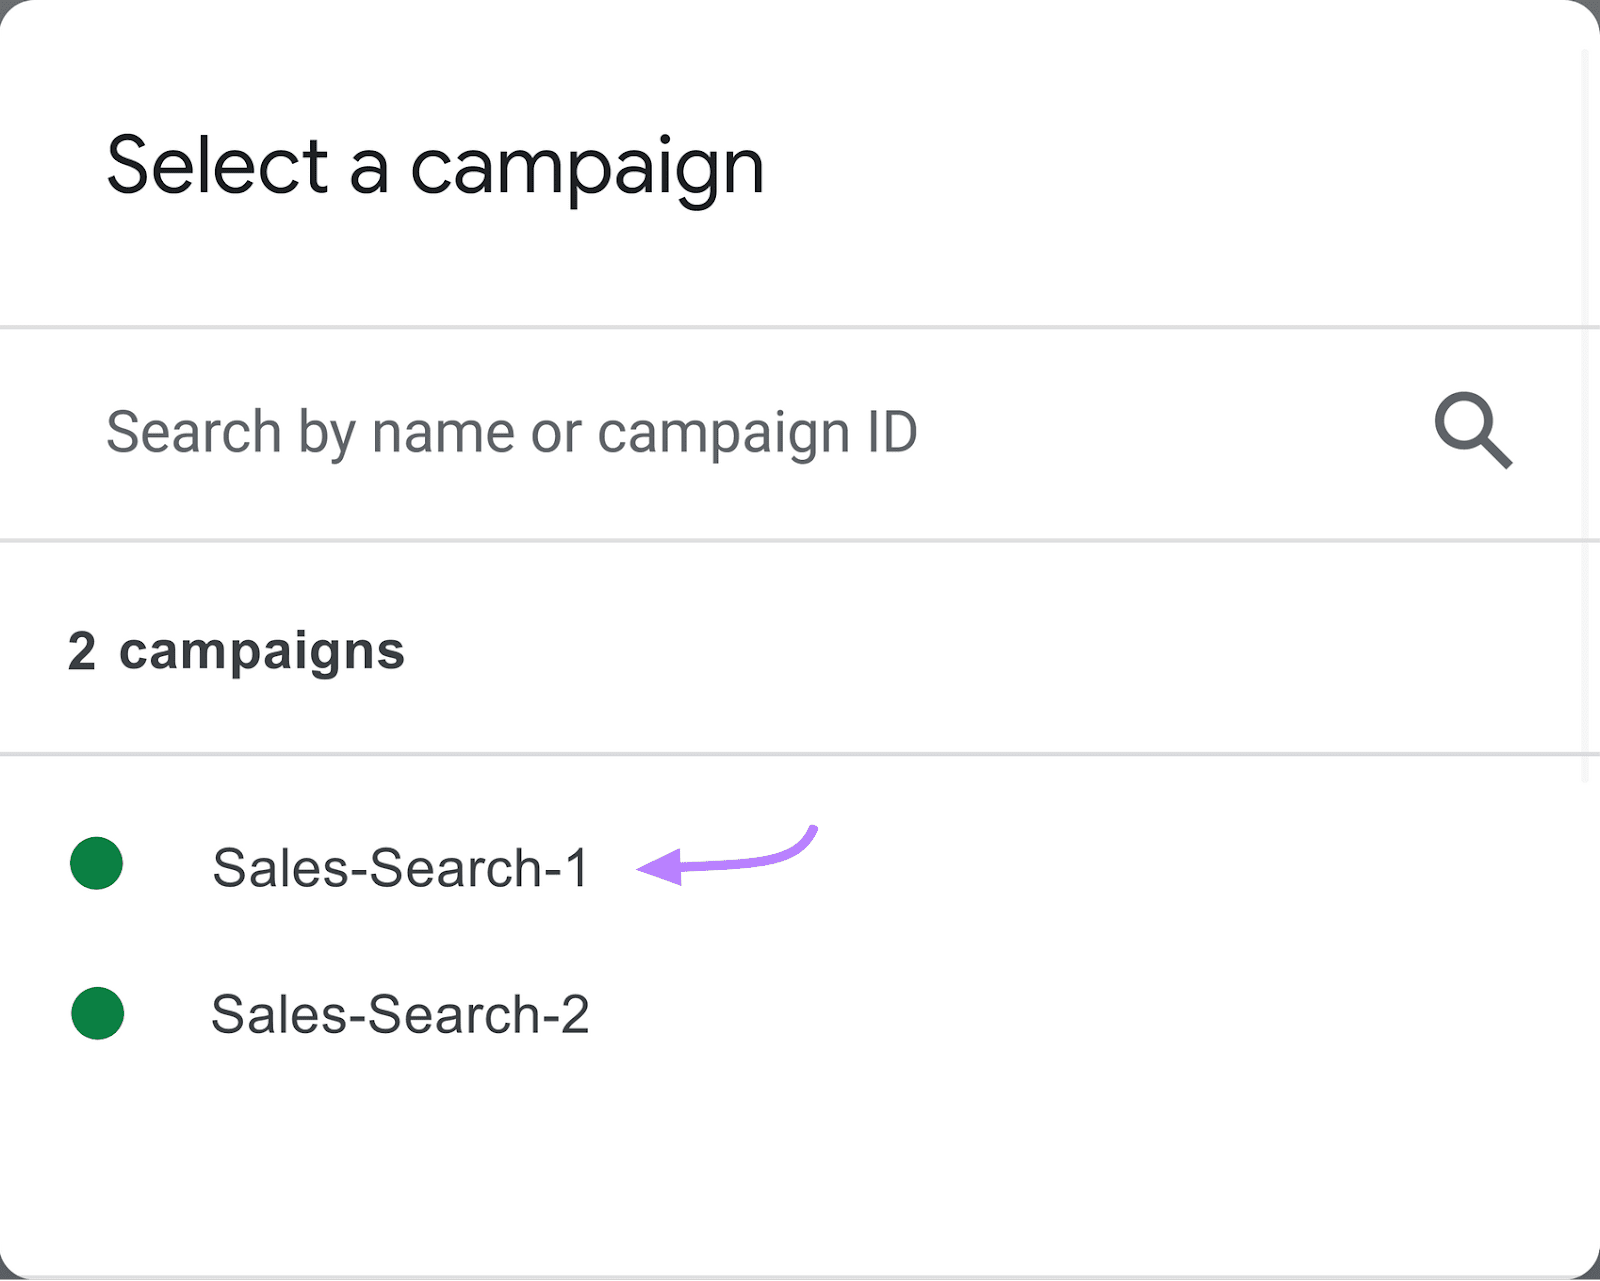 Google Ads screen for selecting a campaign, with 2 listed campaigns, the "Sales-Search-1" one with an arrow pointing to it.